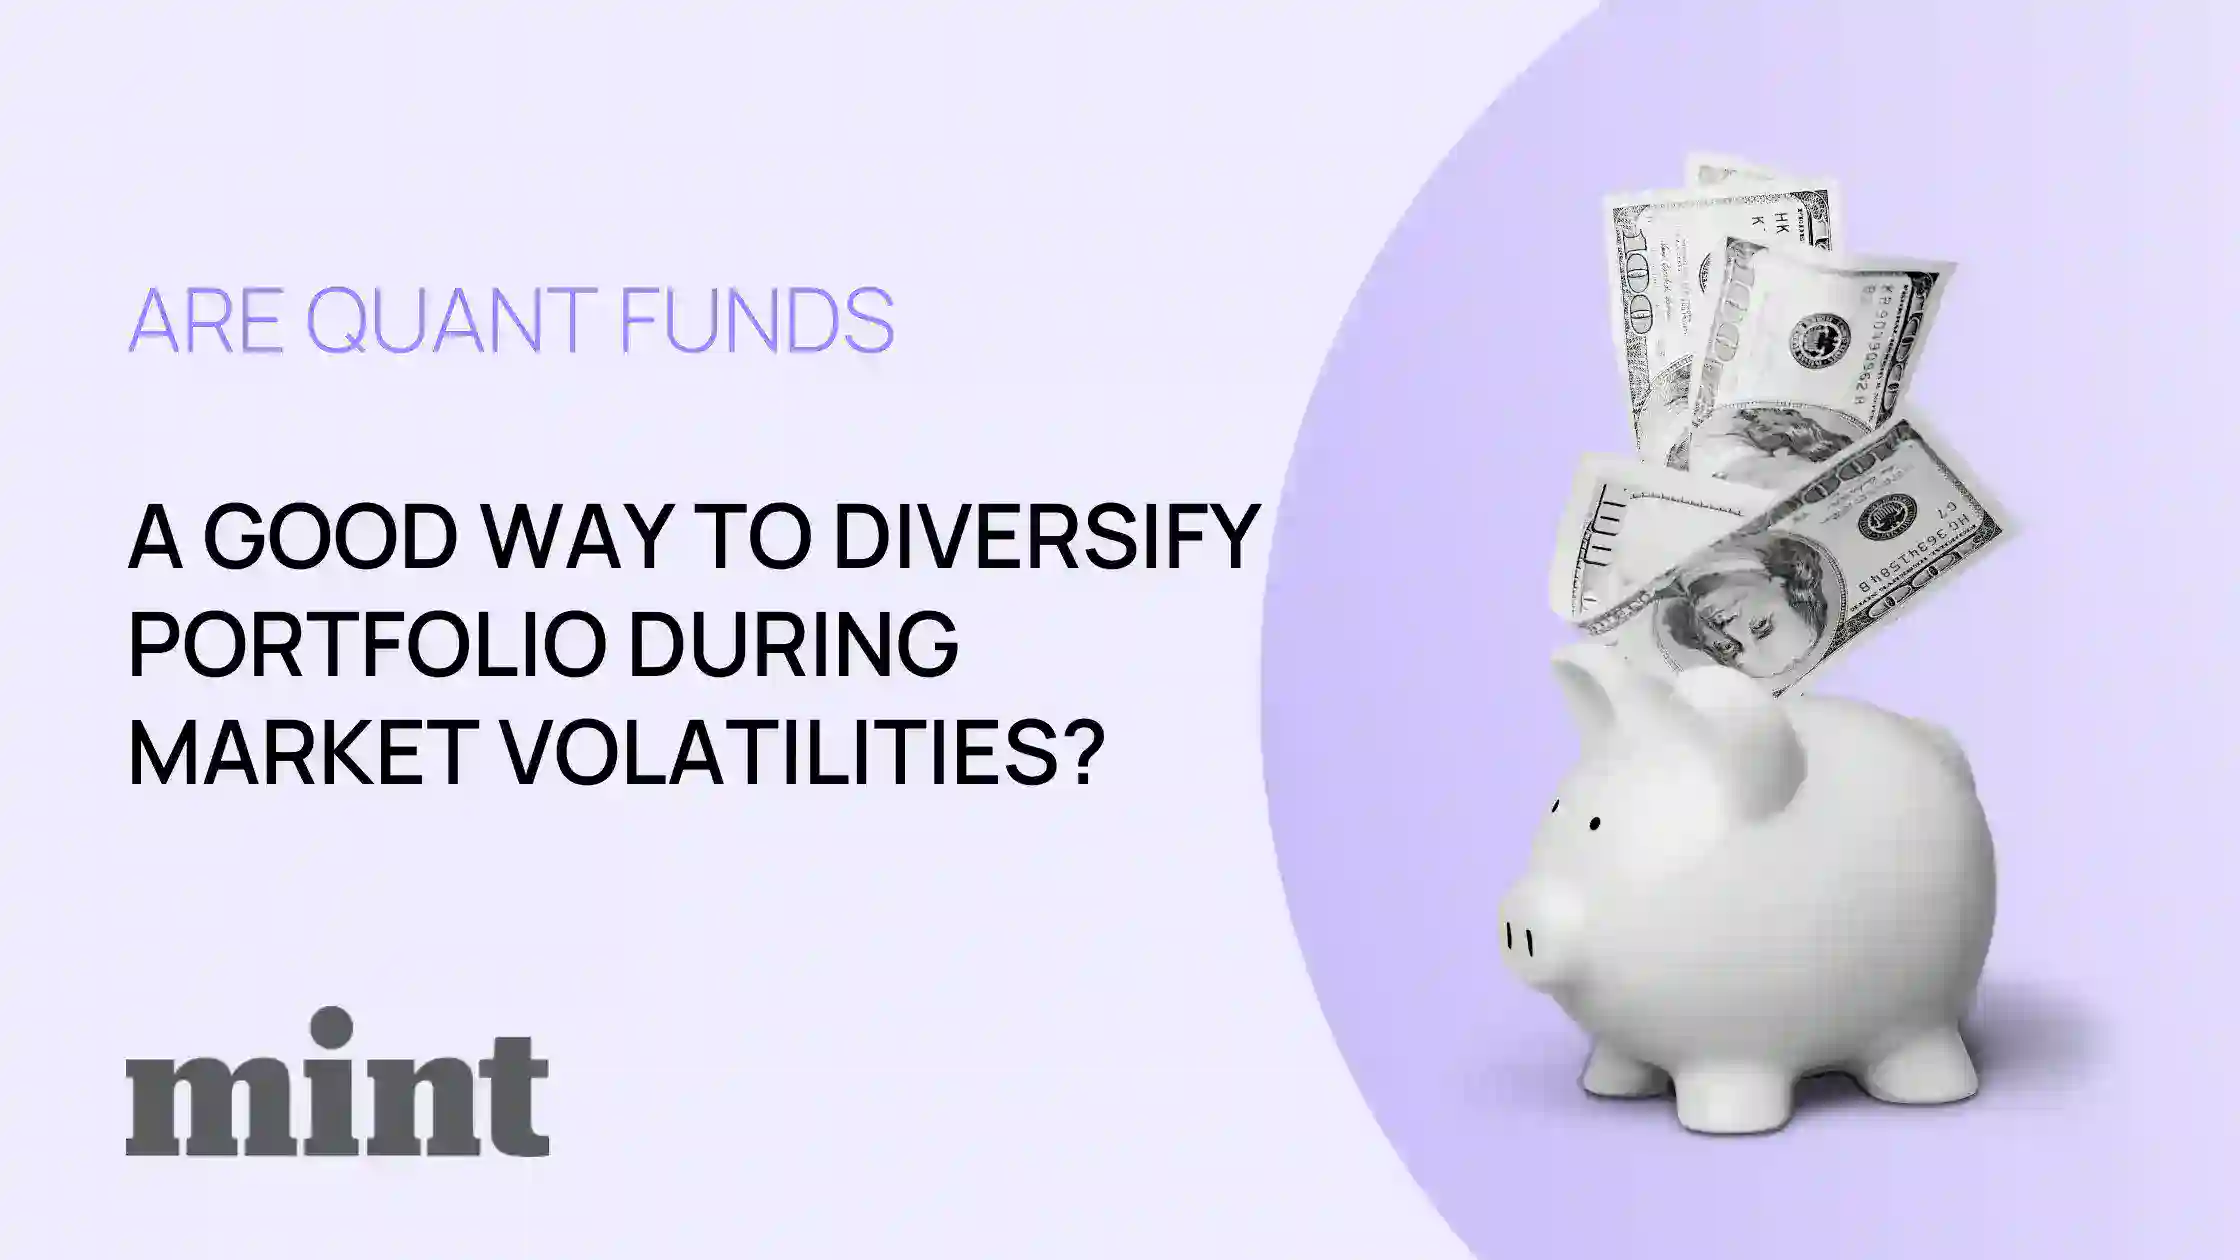 Are quant funds a good way to diversify portfolio during market volatilities?